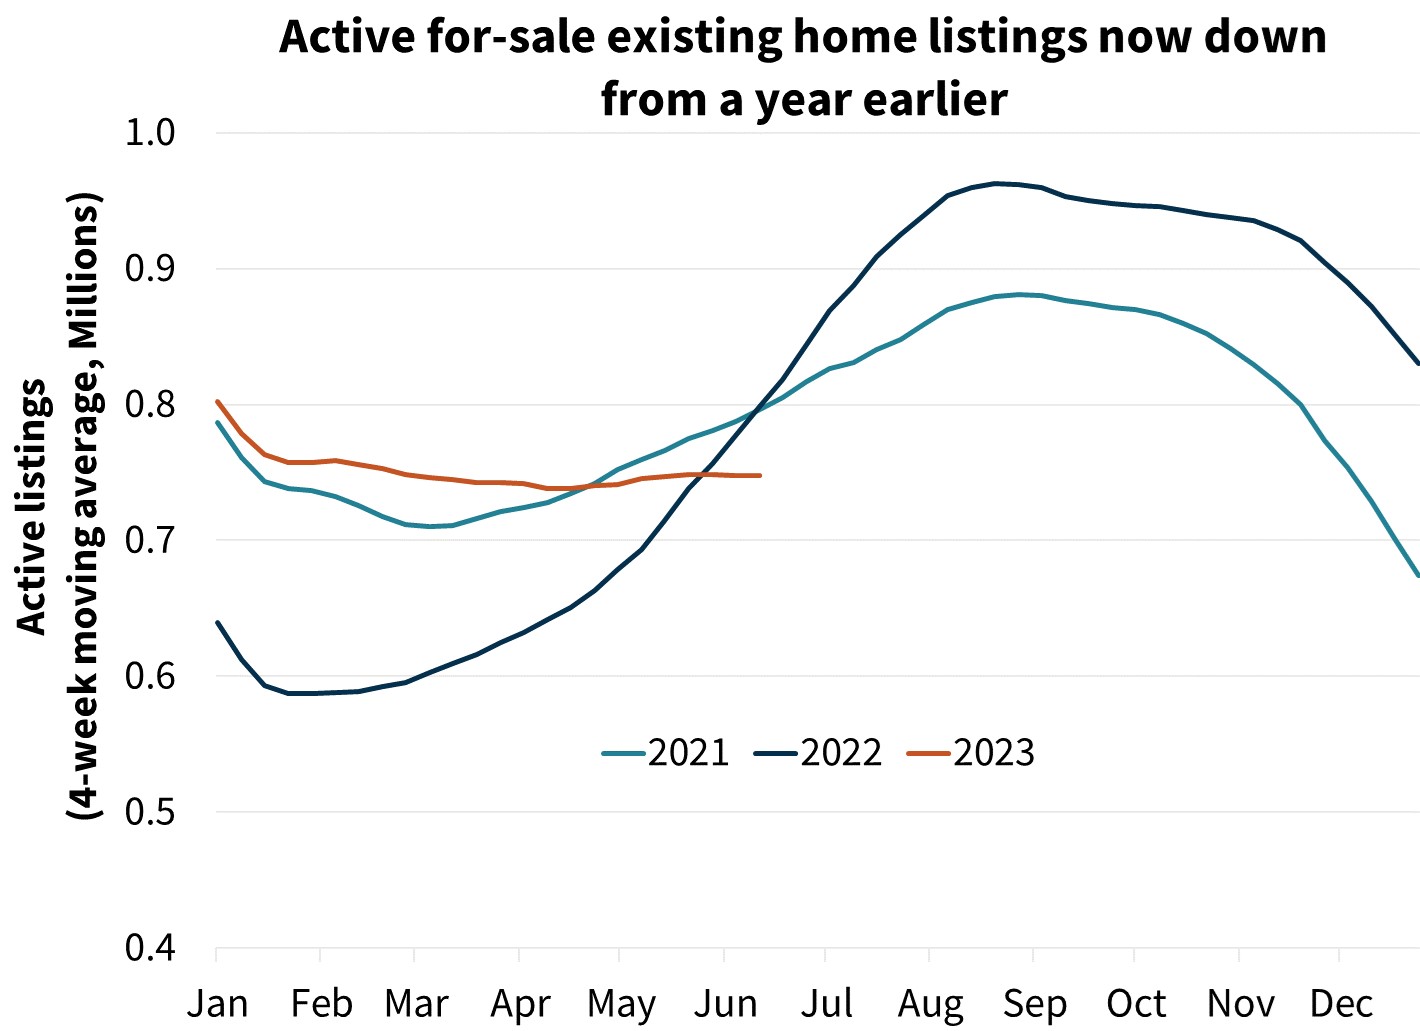  Active for-sale existing home listings now down from a year earlier 